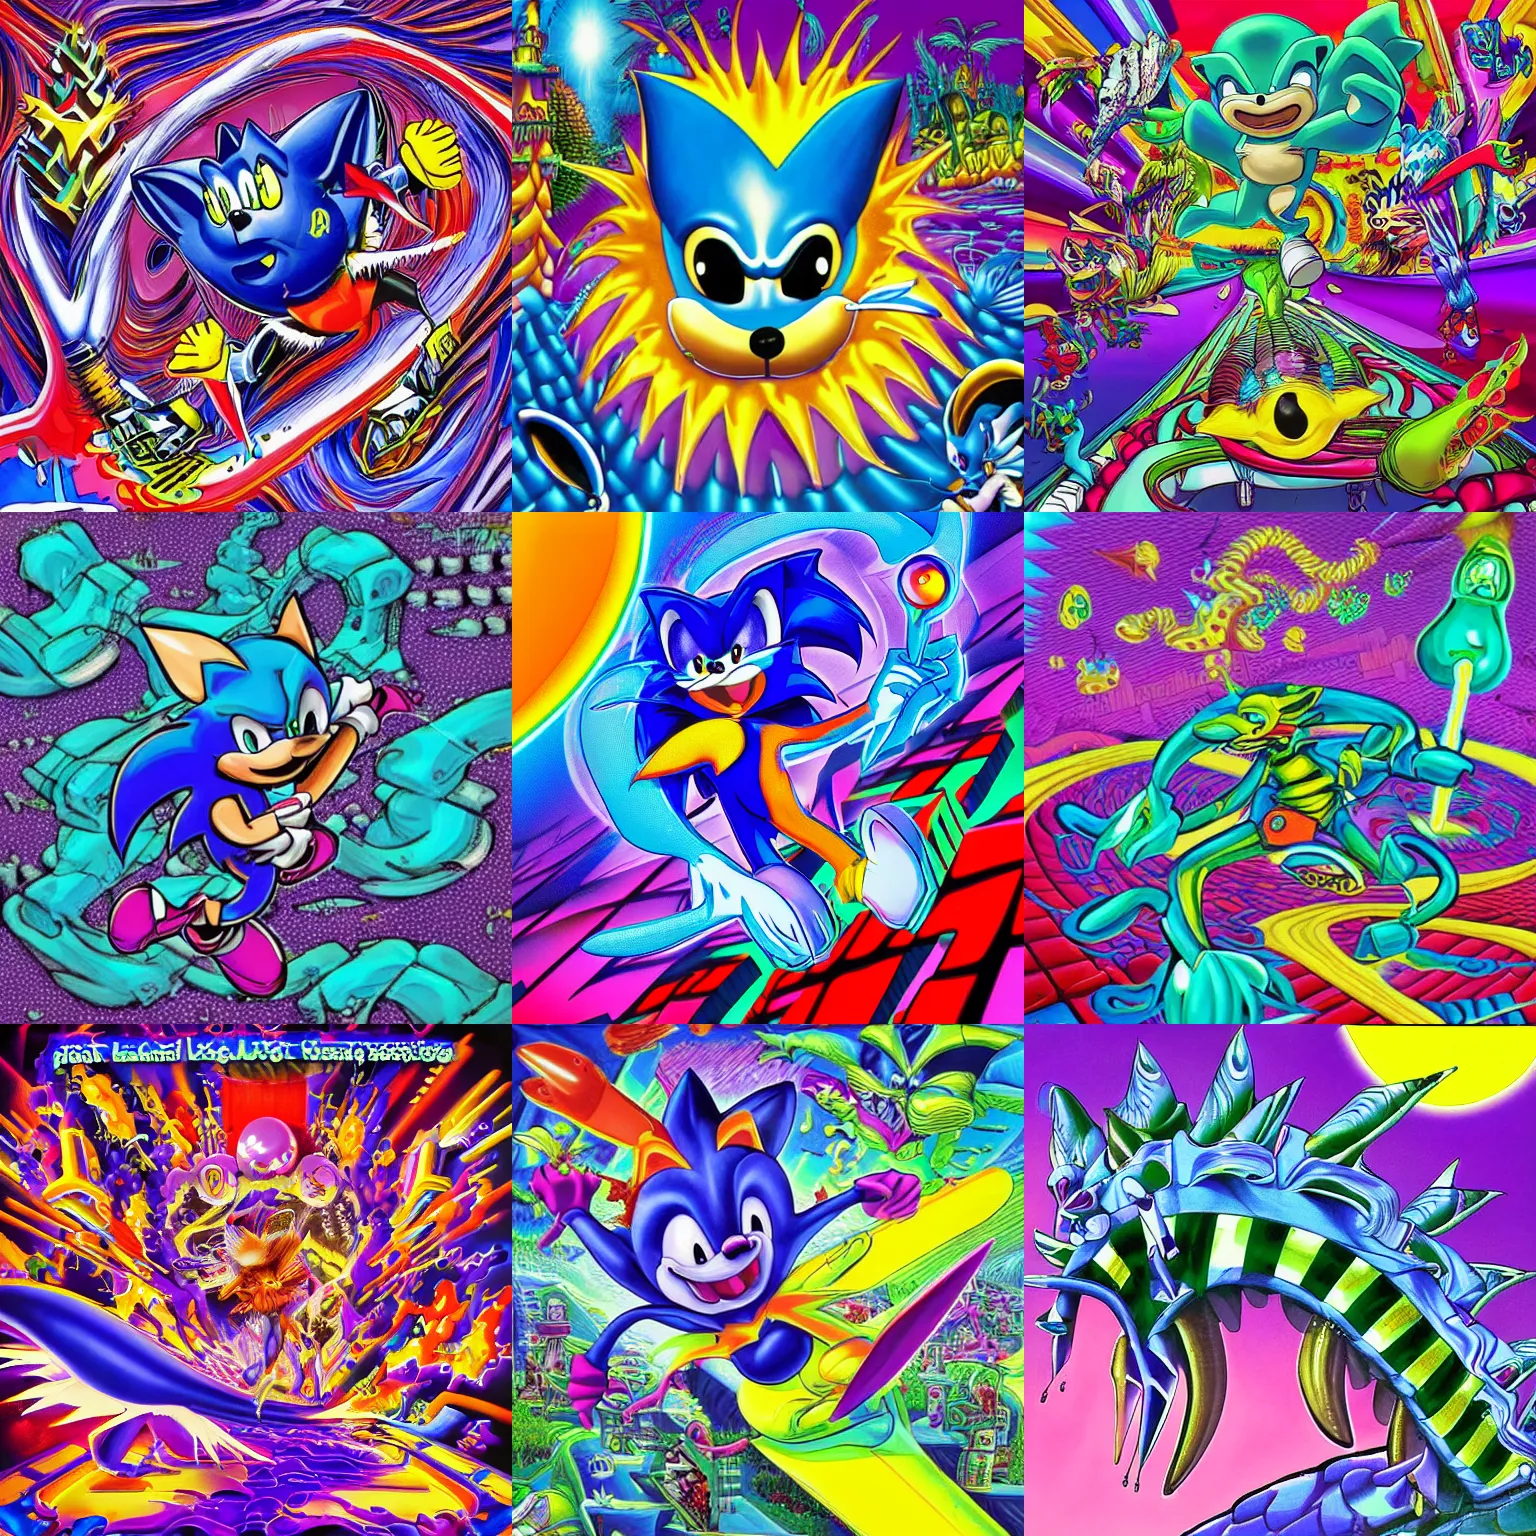 Prompt: surreal, sharp, lowbrow, detailed professional, high quality airbrush art MGMT album cover of a liquid dissolving LSD DMT blue sonic the hedgehog surfing through cyberspace, purple checkerboard background, 1990s 1992 acid house techno Sega Genesis video game album cover